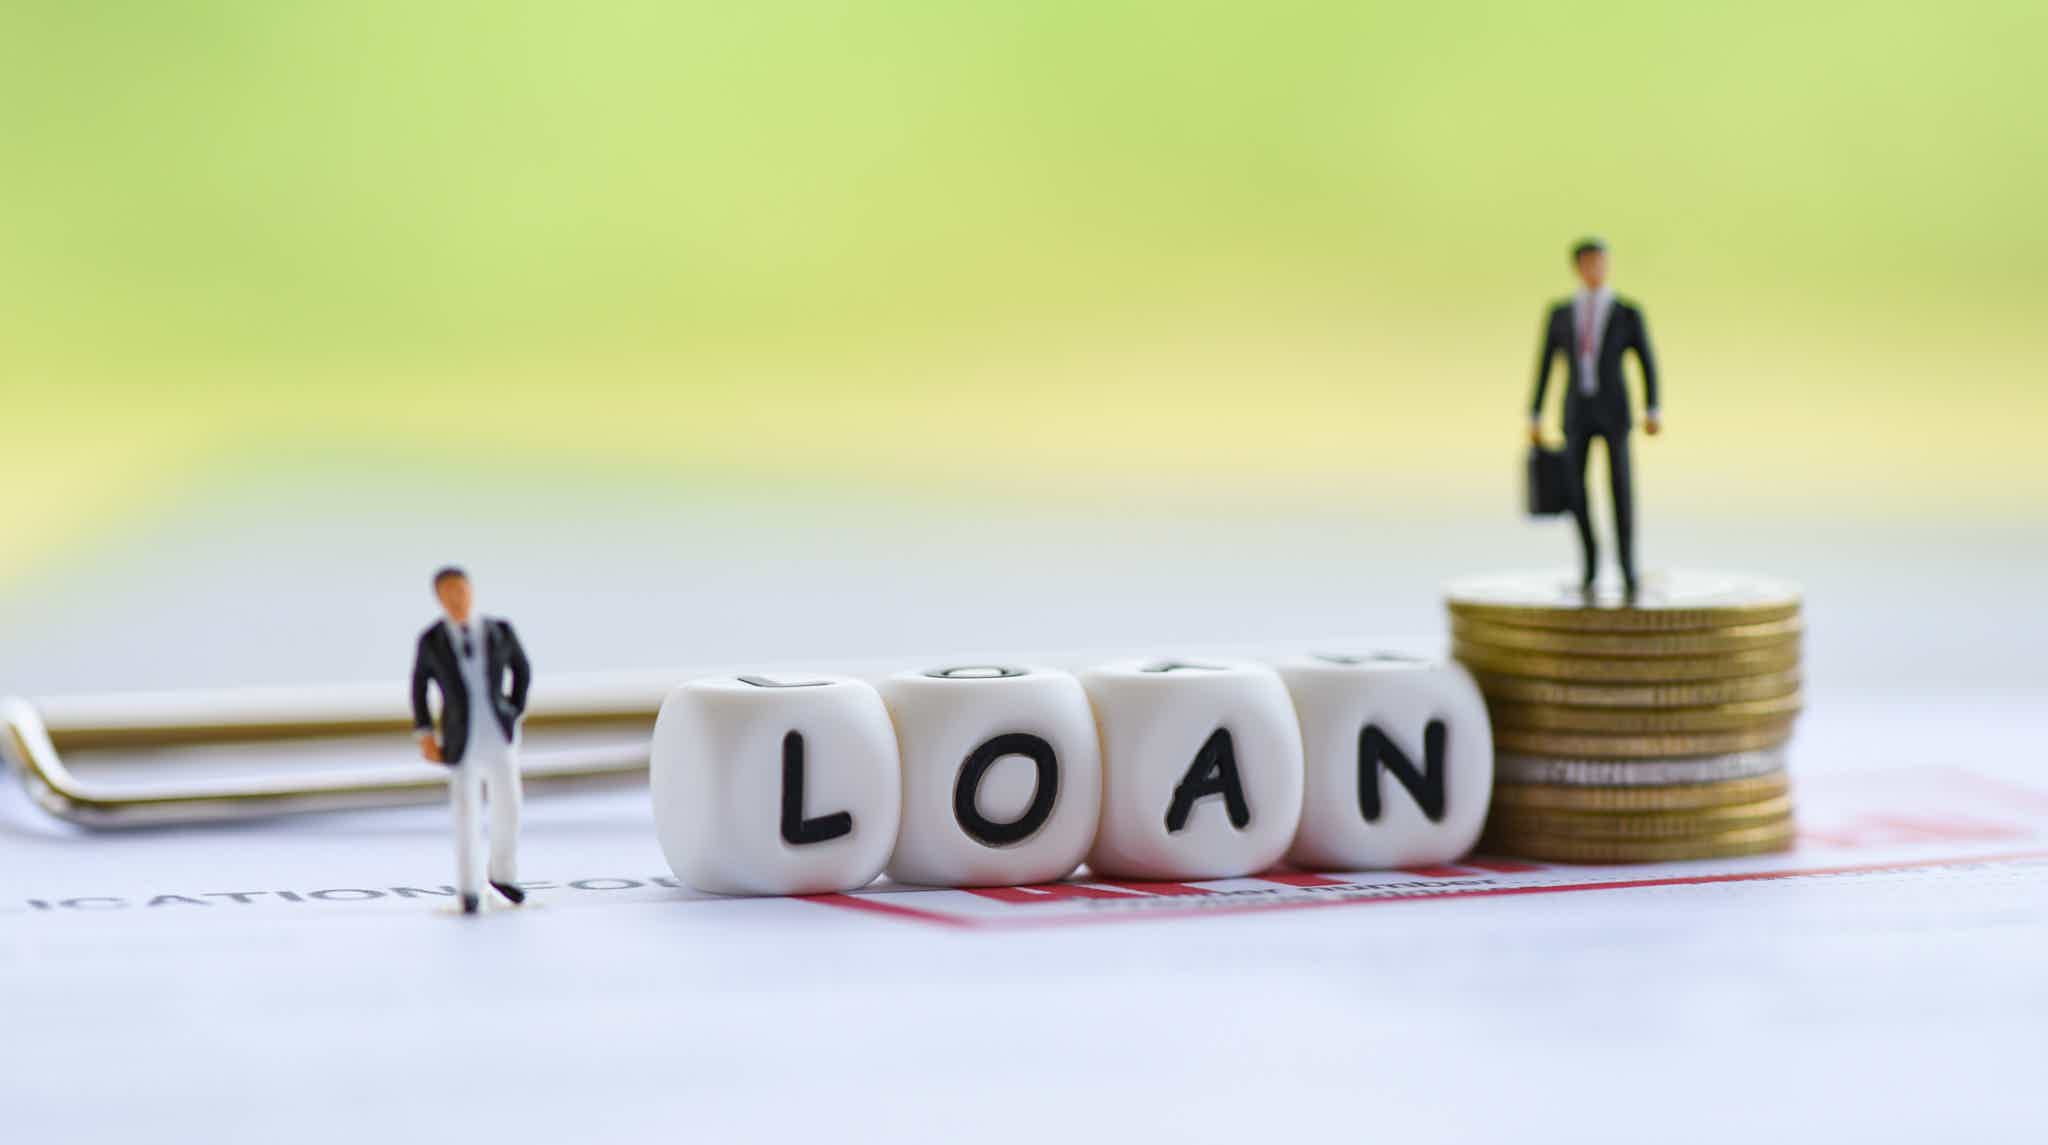 Getting the right personal loan can help you put your finances on track. Source: Adobe Stock.